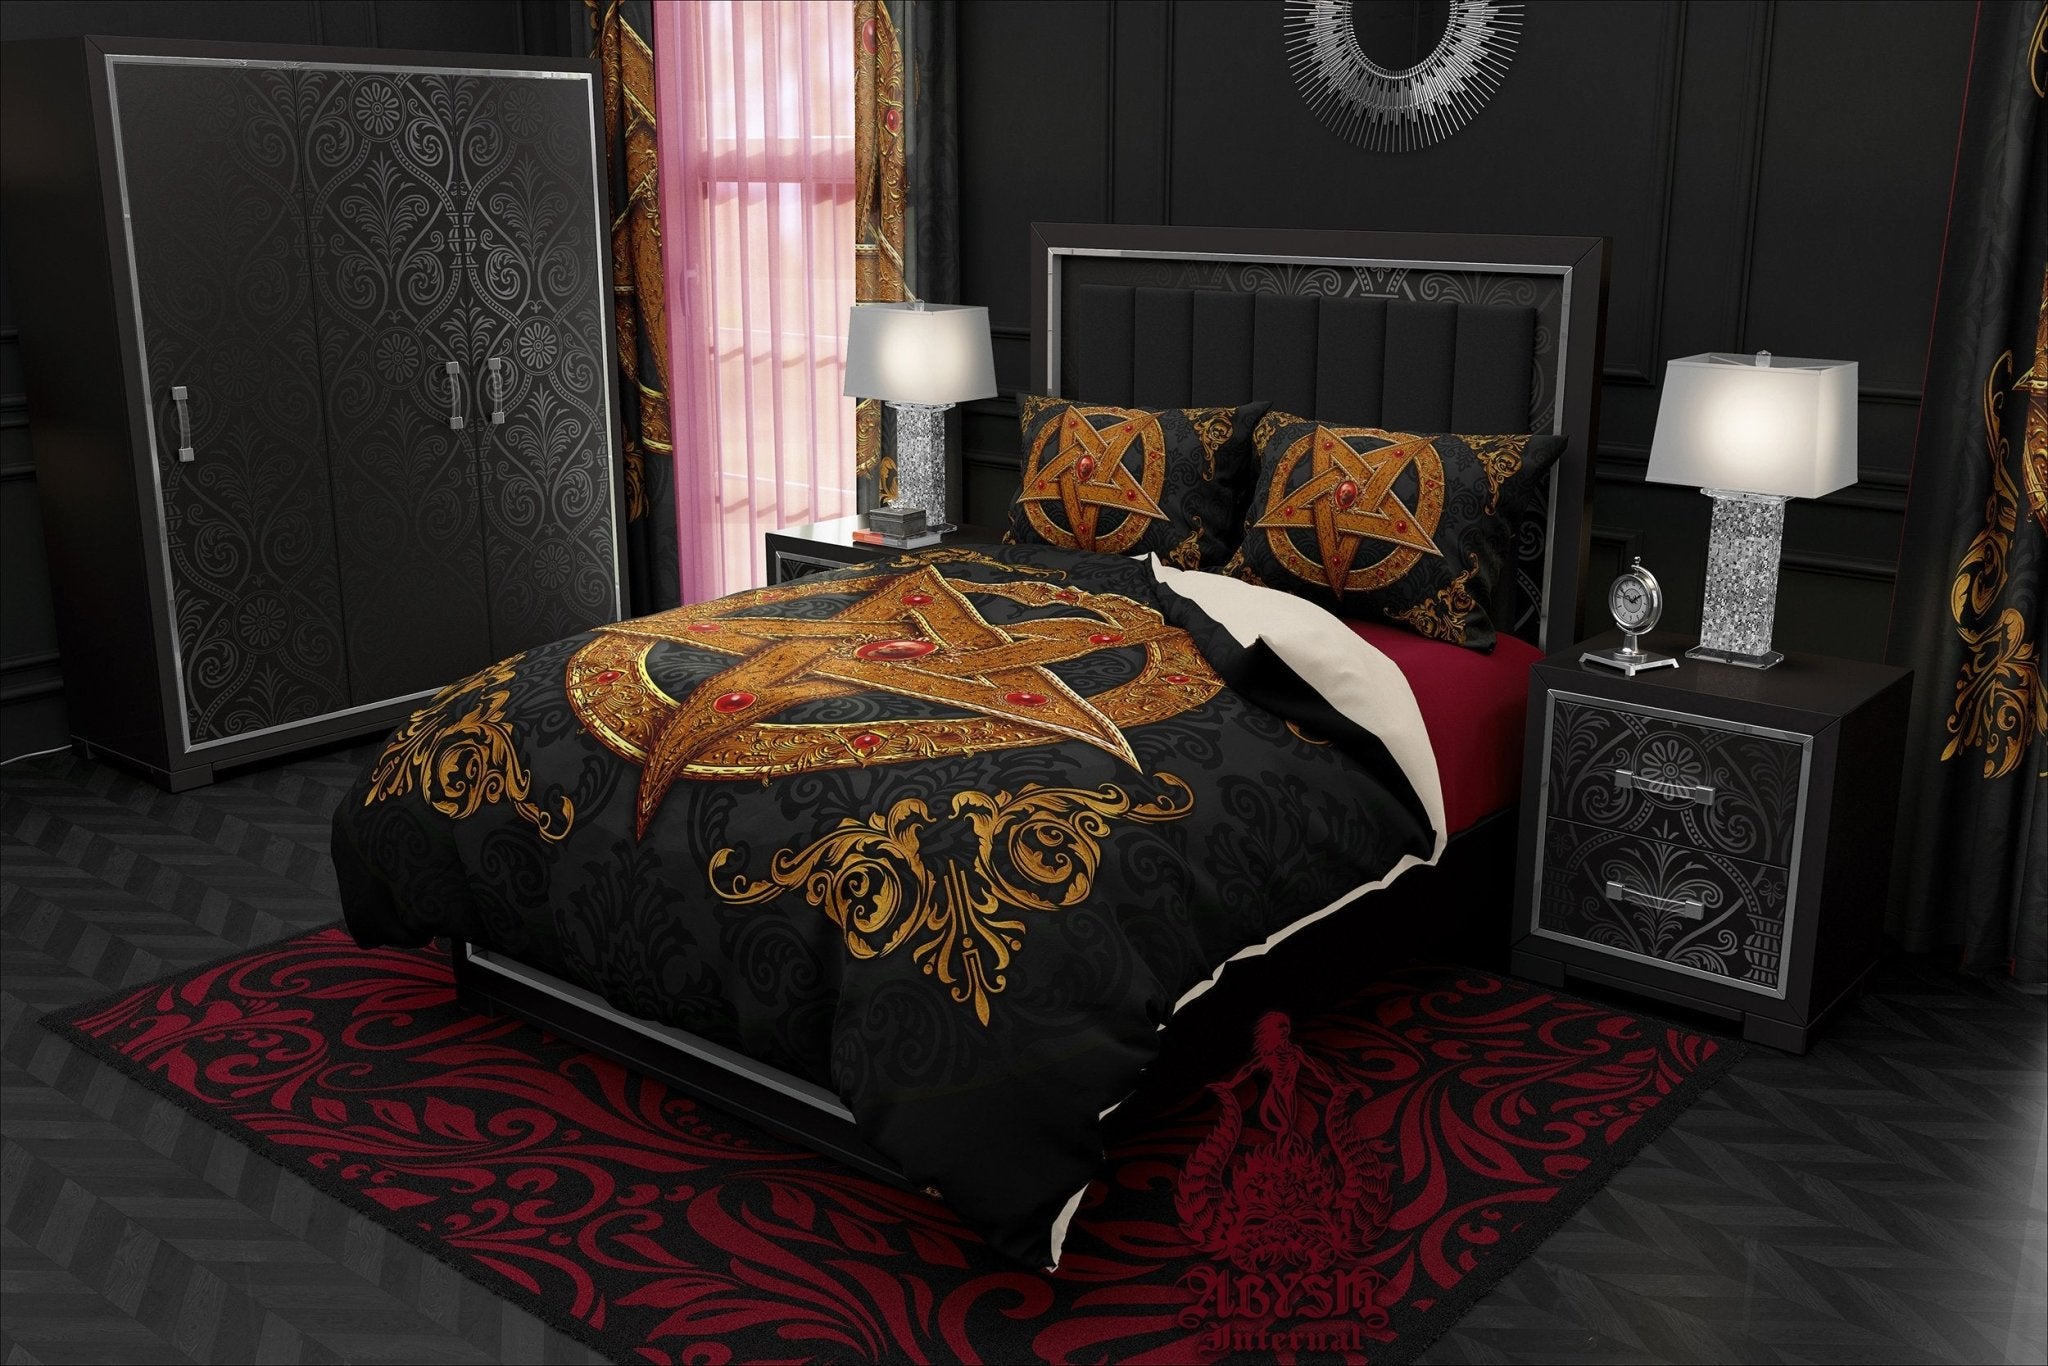 Pentagram Bedding Set, Comforter and Duvet, Satanic Goth Bed Cover and Bedroom Decor, King, Queen and Twin Size - Gold - Abysm Internal